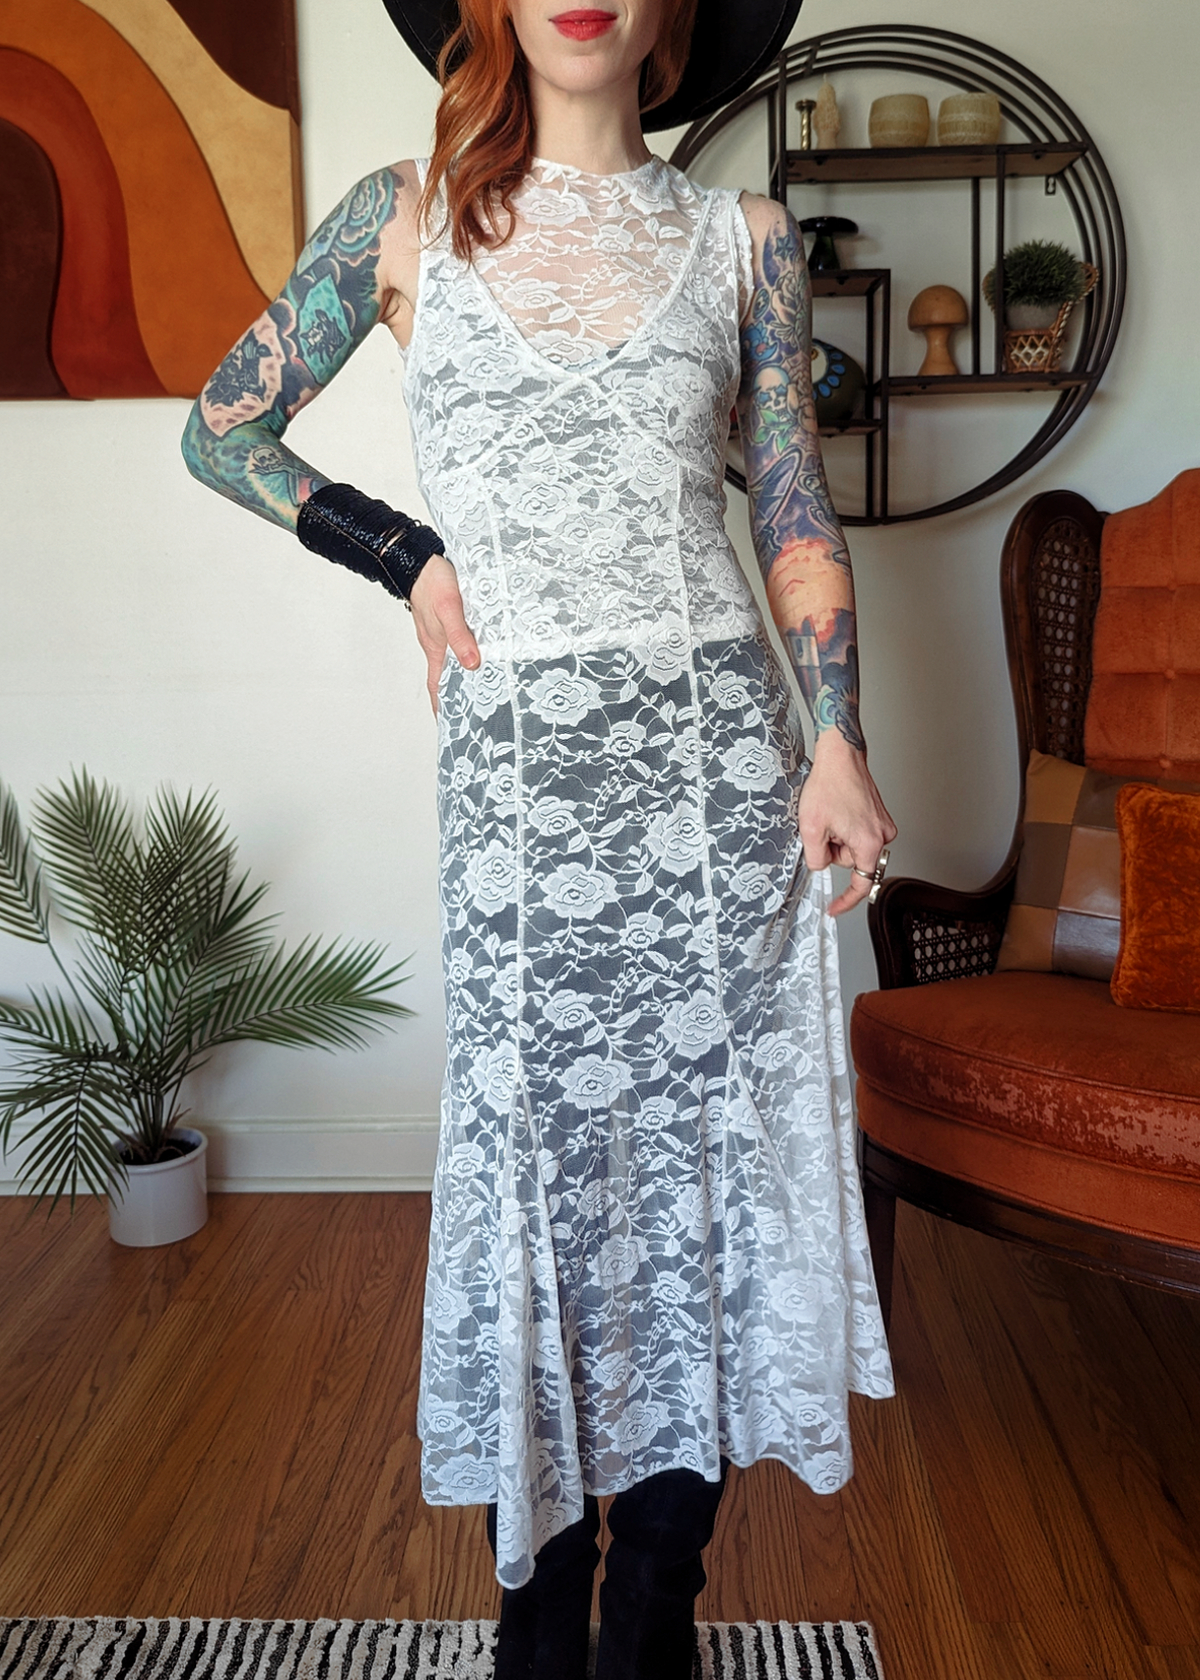 90s inspired sheer unlined white lace floral midi dress with sleeveless design and deep-v neckline by Motel Rocks Stevie Nicks Vibes